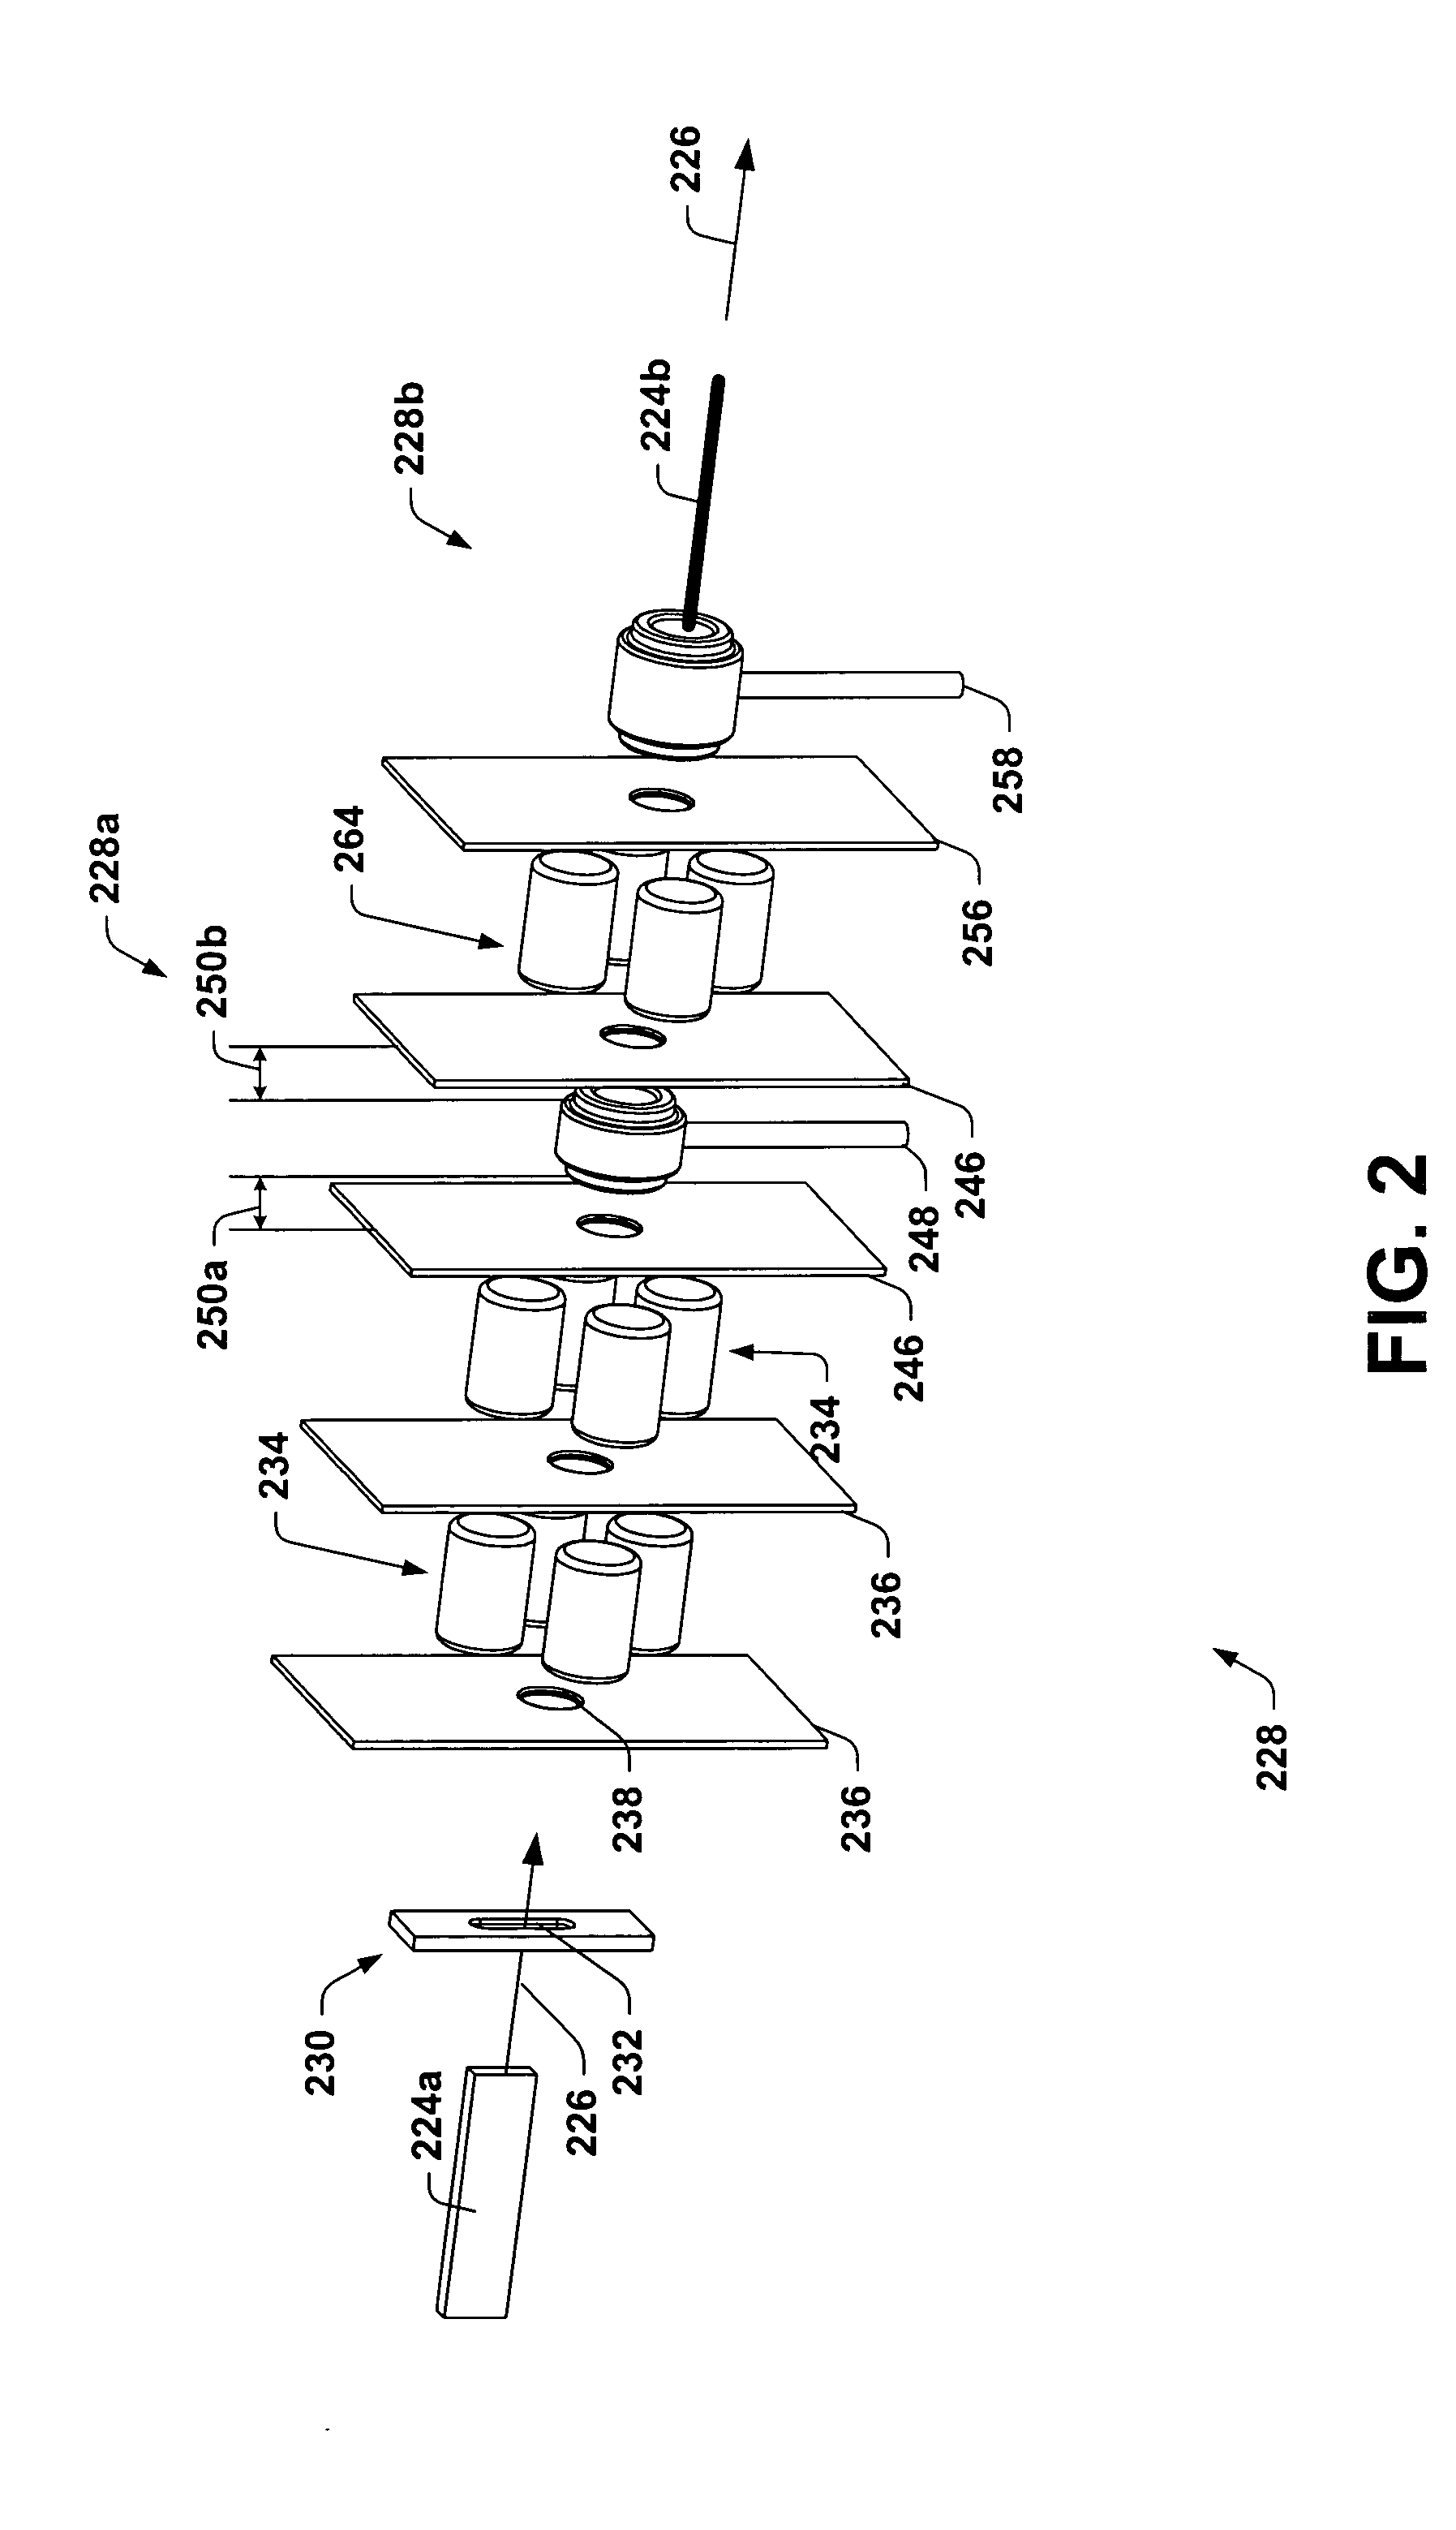 Unipolar electrostatic quadrupole lens and switching methods for charged beam transport